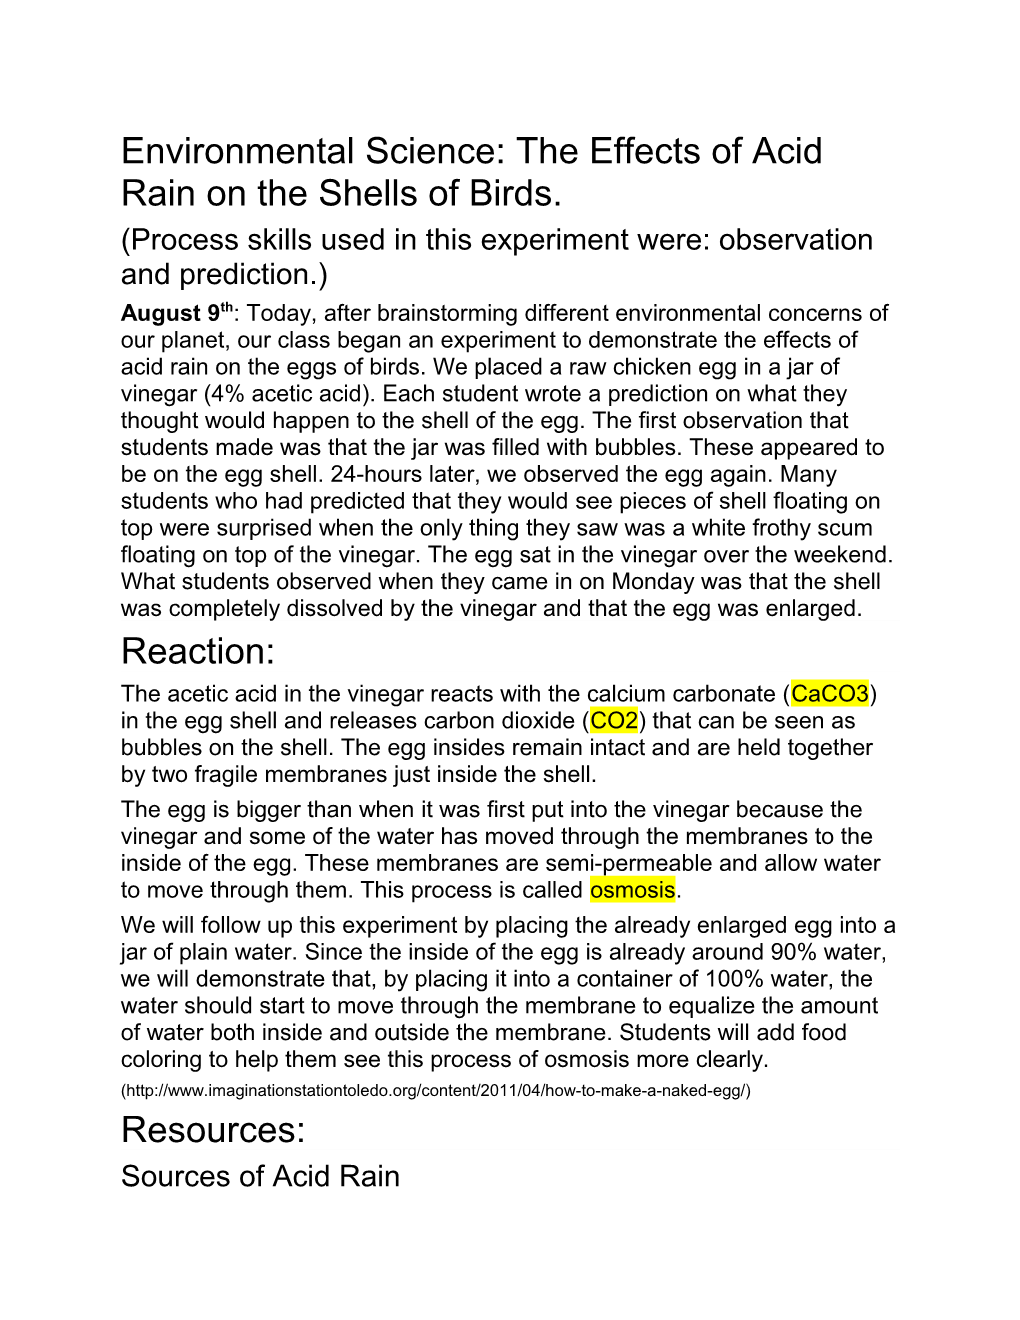 Environmental Science: the Effects of Acid Rain on the Shells of Birds